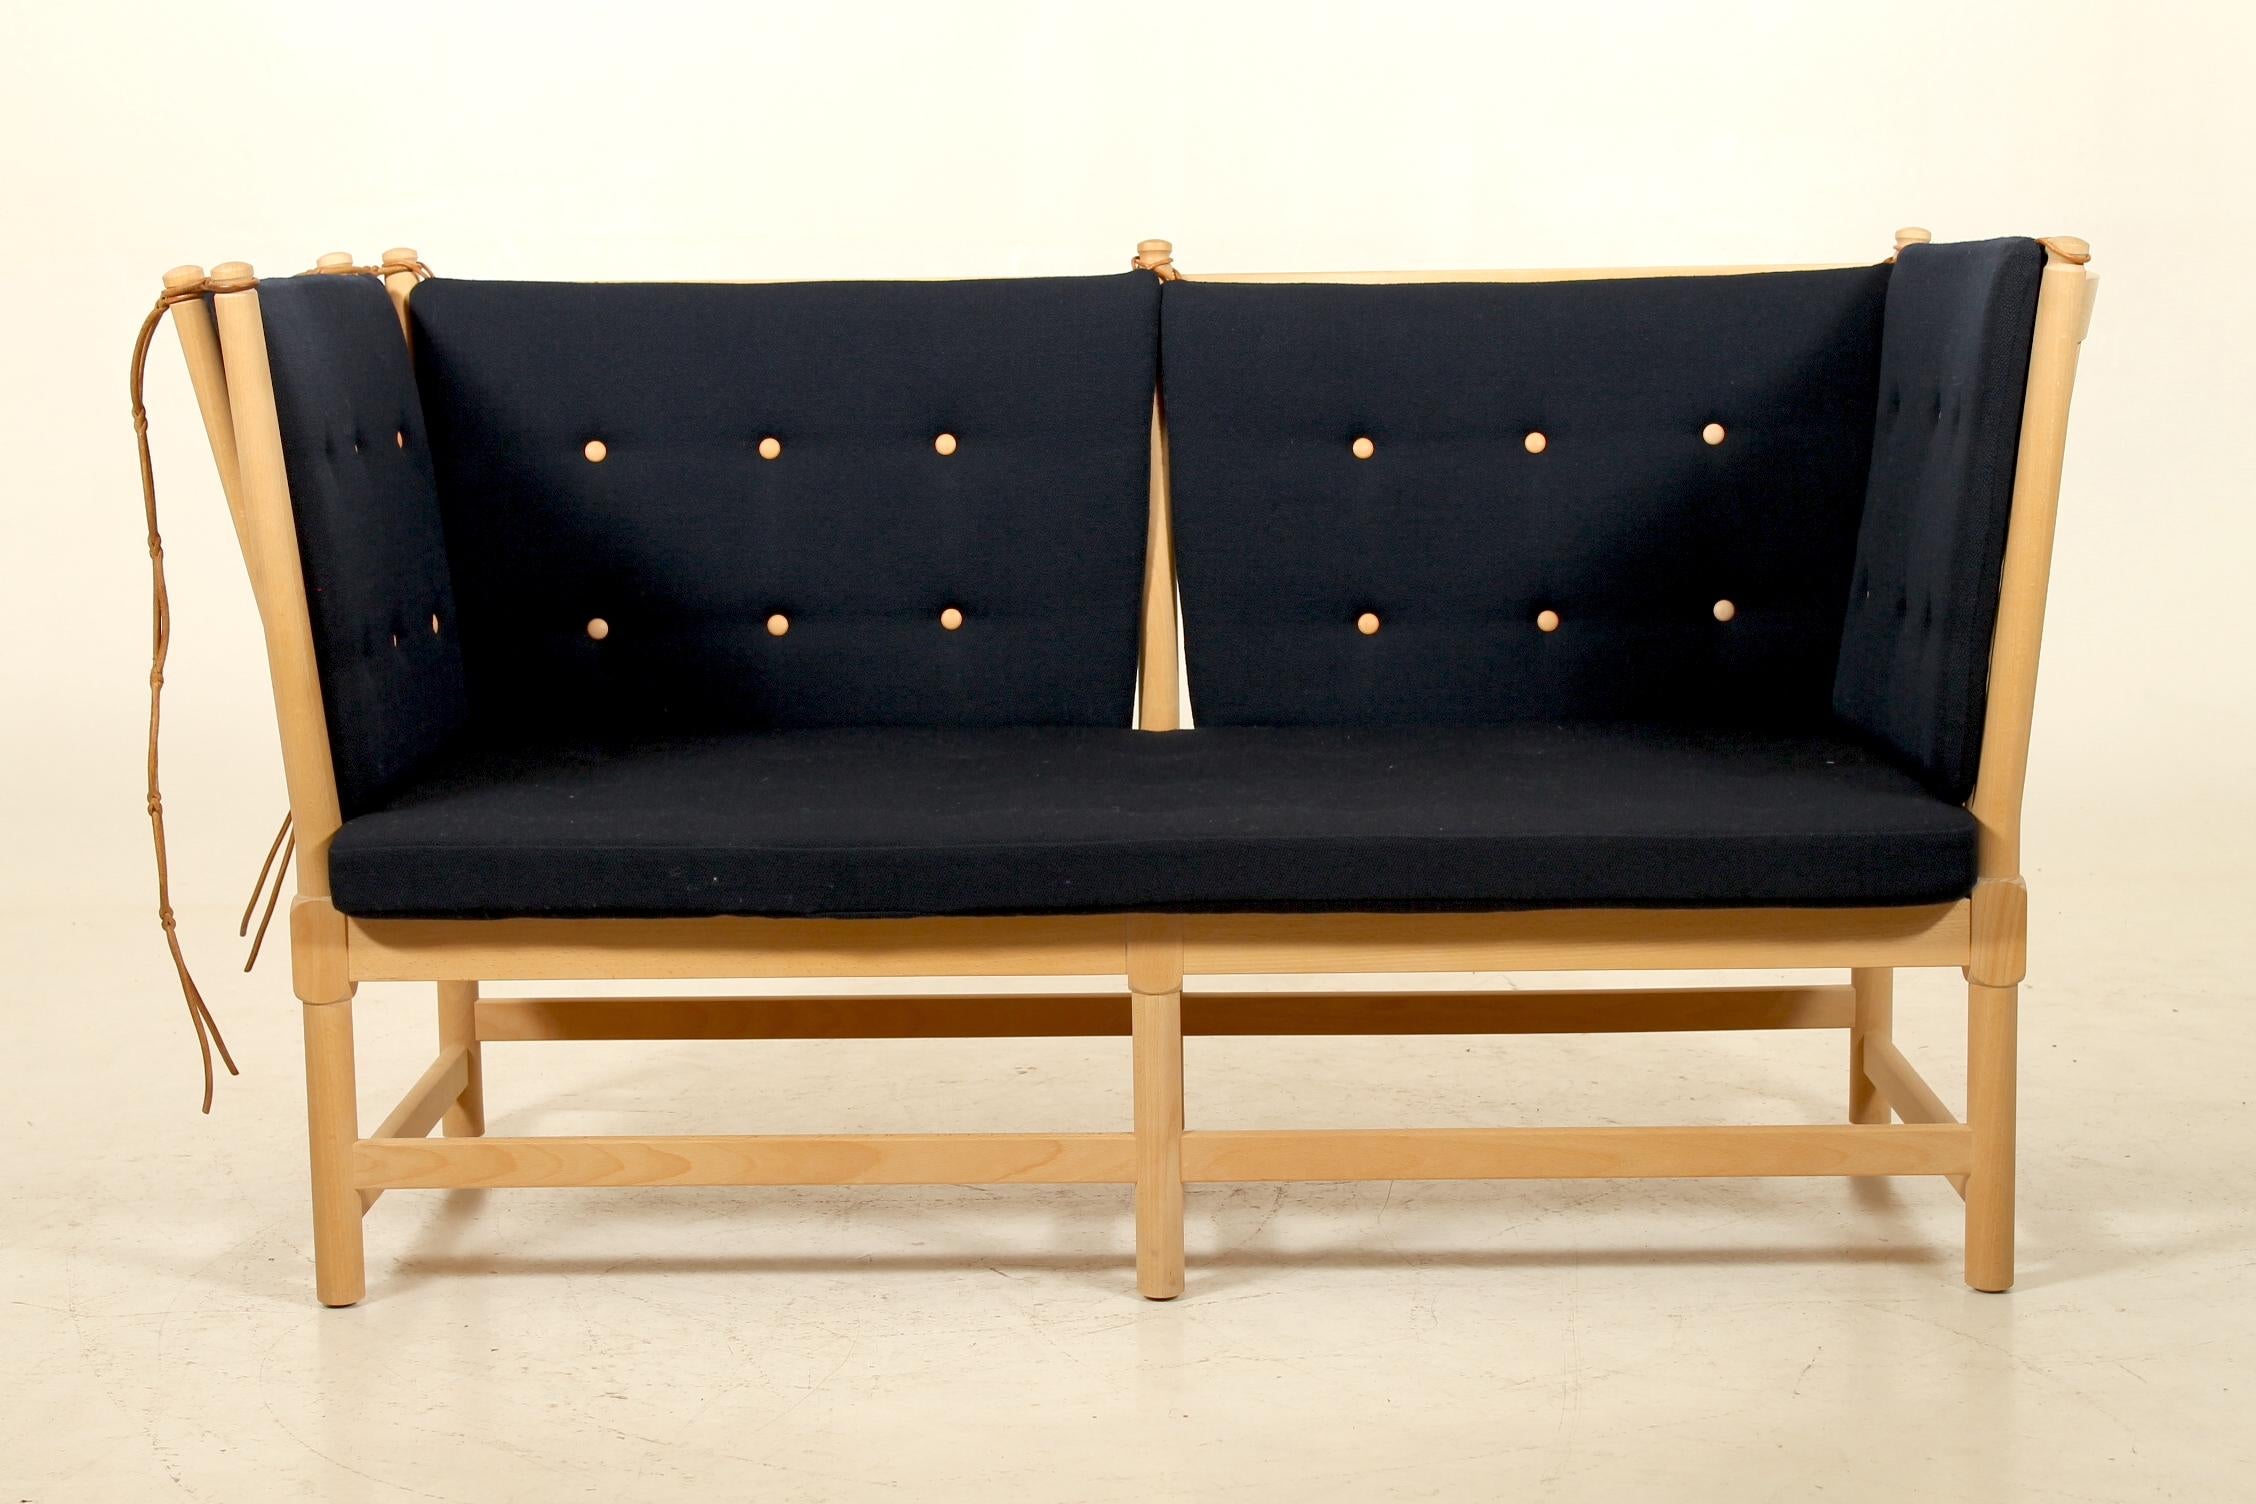 The iconic tremmesofa or spoke-back sofa in beech designed by Børge Mogensen in 1945 and produced by Fritz Hansen, Denmark.
New cushions in fabric with leather buttons.